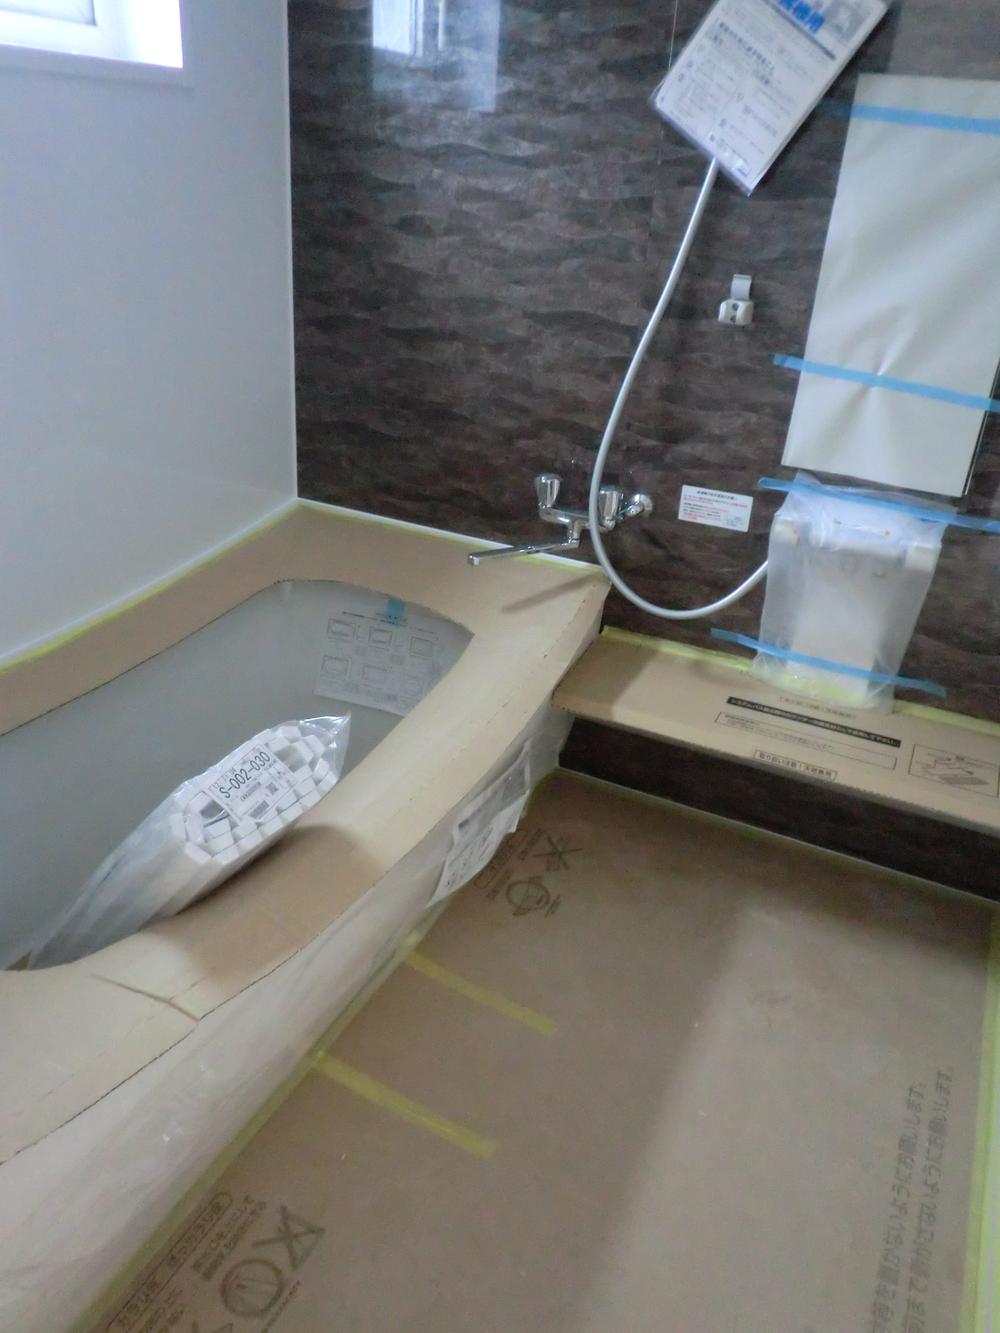 Bathroom. Indoor (12 May 2013) Shooting 1 tsubo unit bus new, Spacious comfortable bath time with family